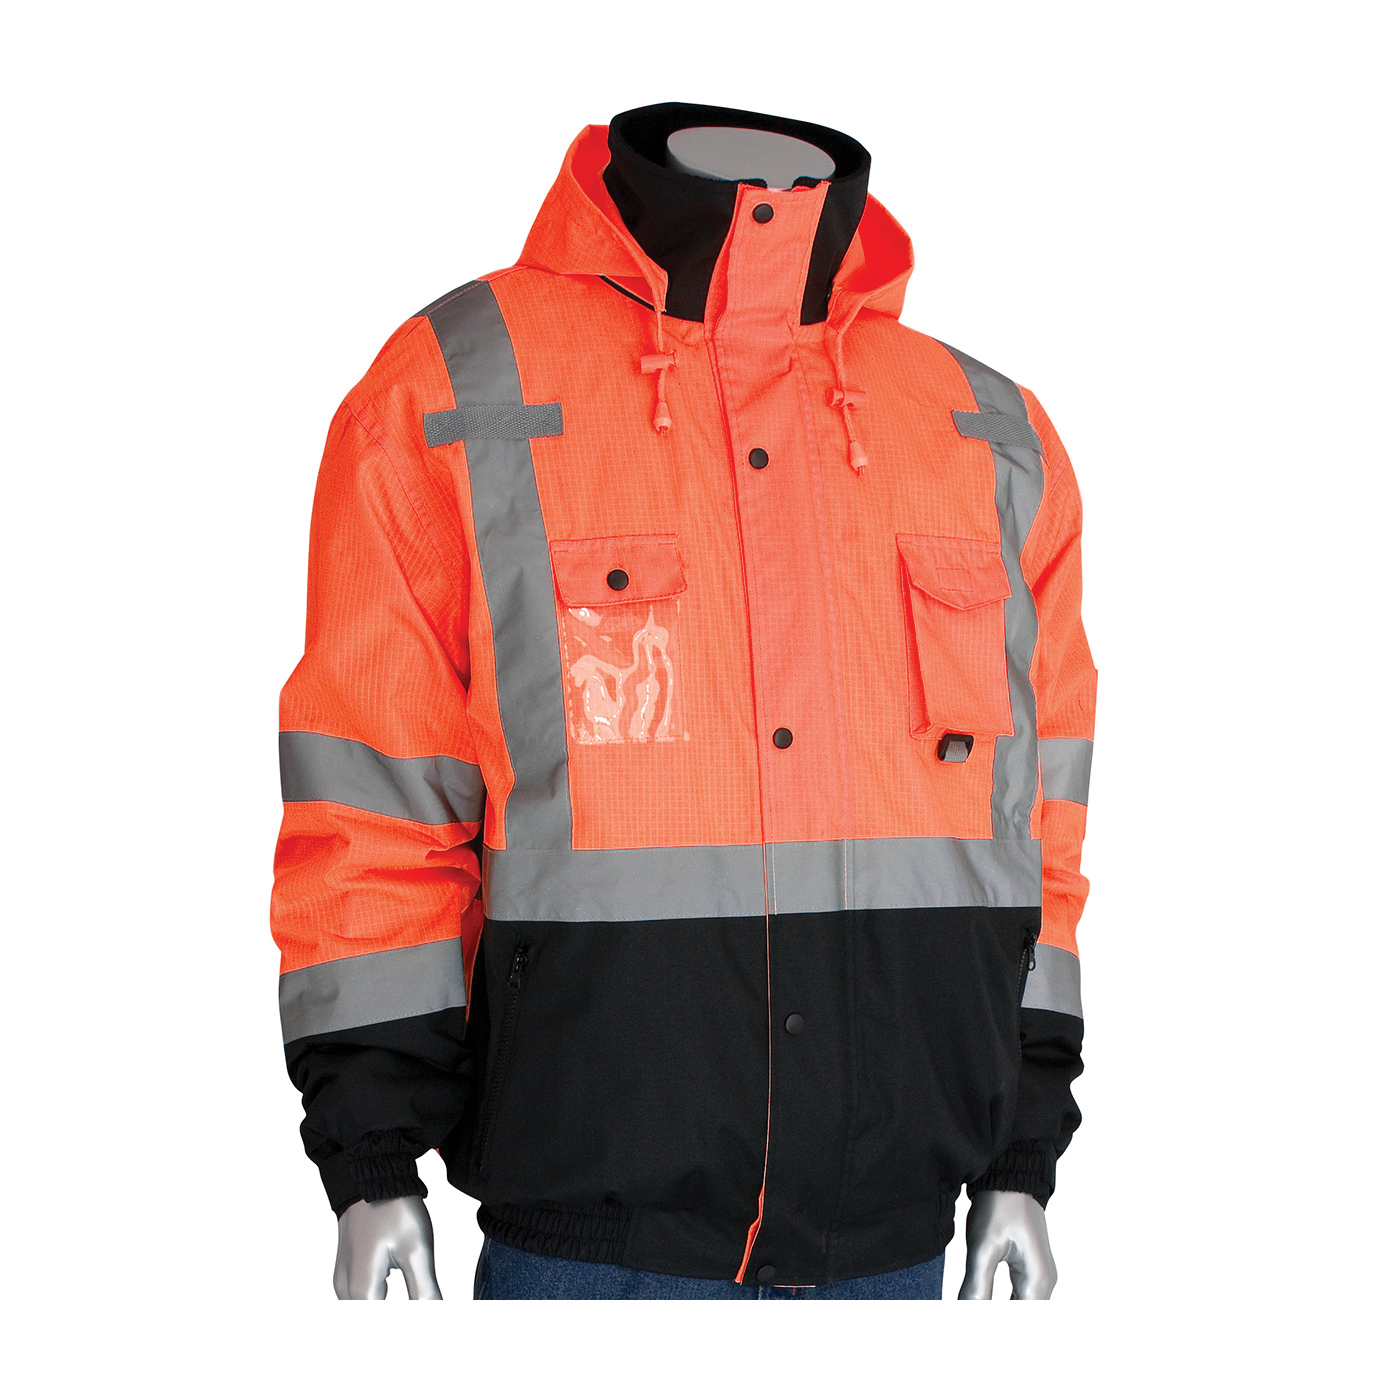 PIP® 333-1770-OR/XL Bomber Jacket With Zip-Out Fleece Liner, Hi-Viz Orange, Polyester, 59 in Chest, Resists: Water, Specifications Met: ANSI 107 Class 3 Type R